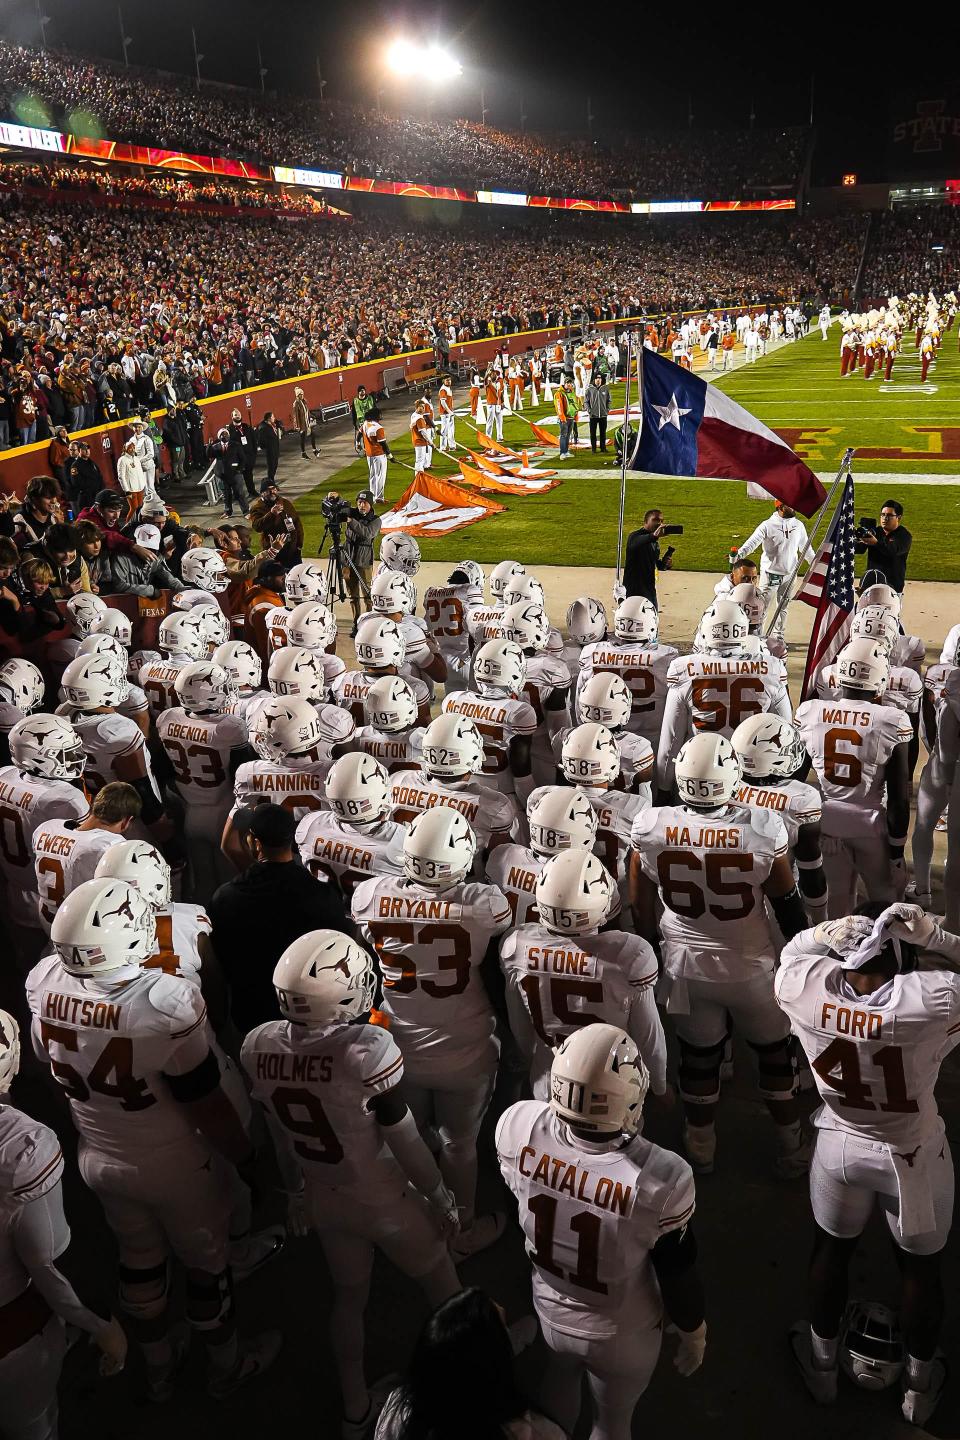 The Longhorns, preparing to take the field at Iowa State, are 12-1 heading into the CFP semifinals Jan. 1 at the Sugar Bowl against Washington.